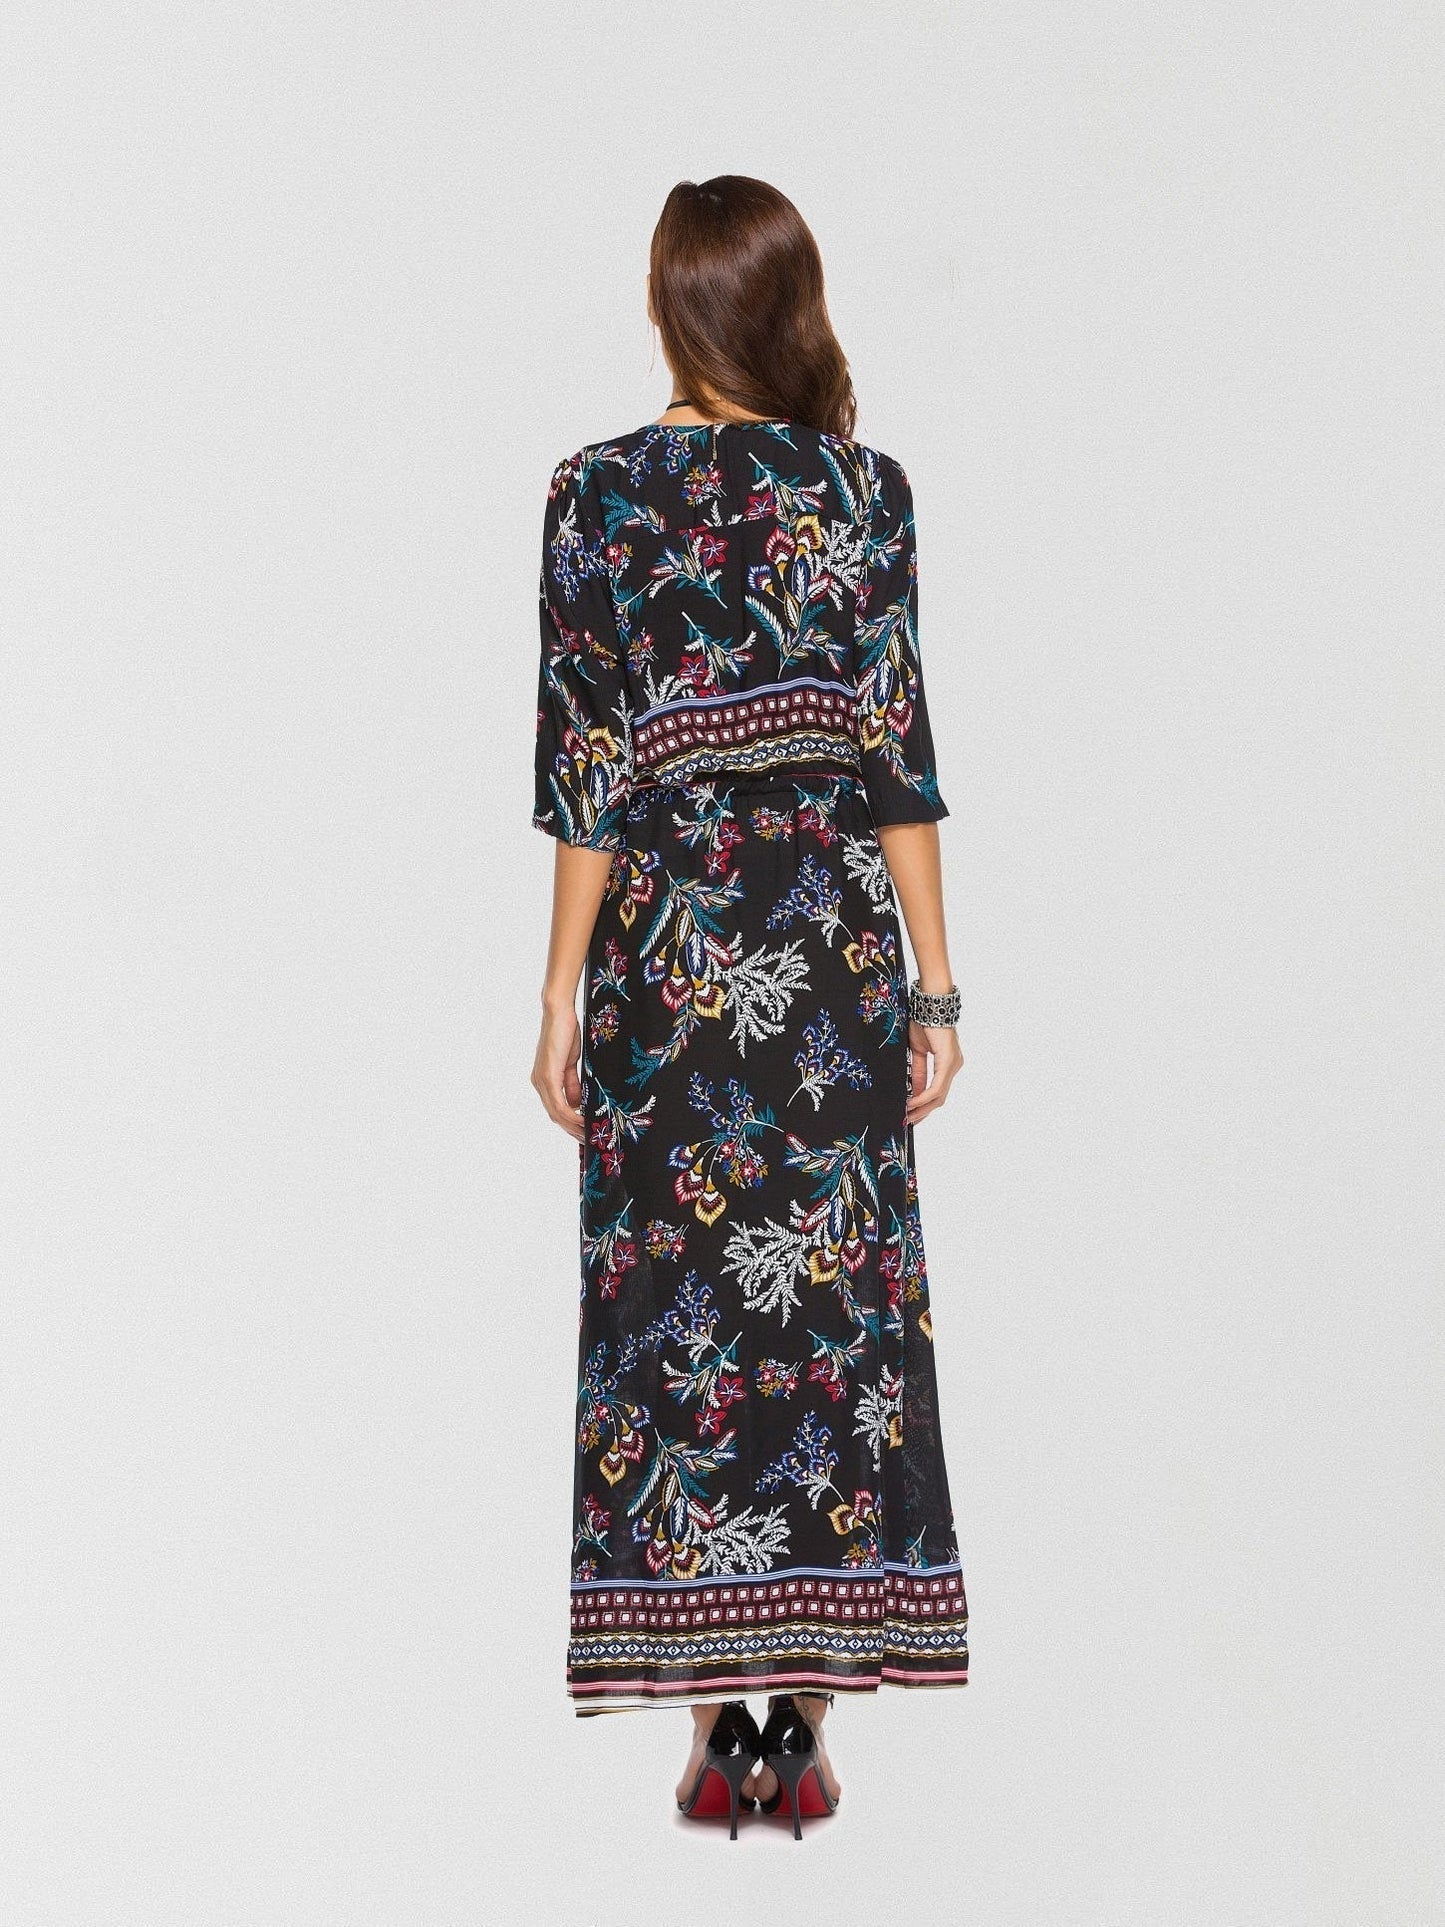 Going Somewhere Floral Button Down Maxi Dress